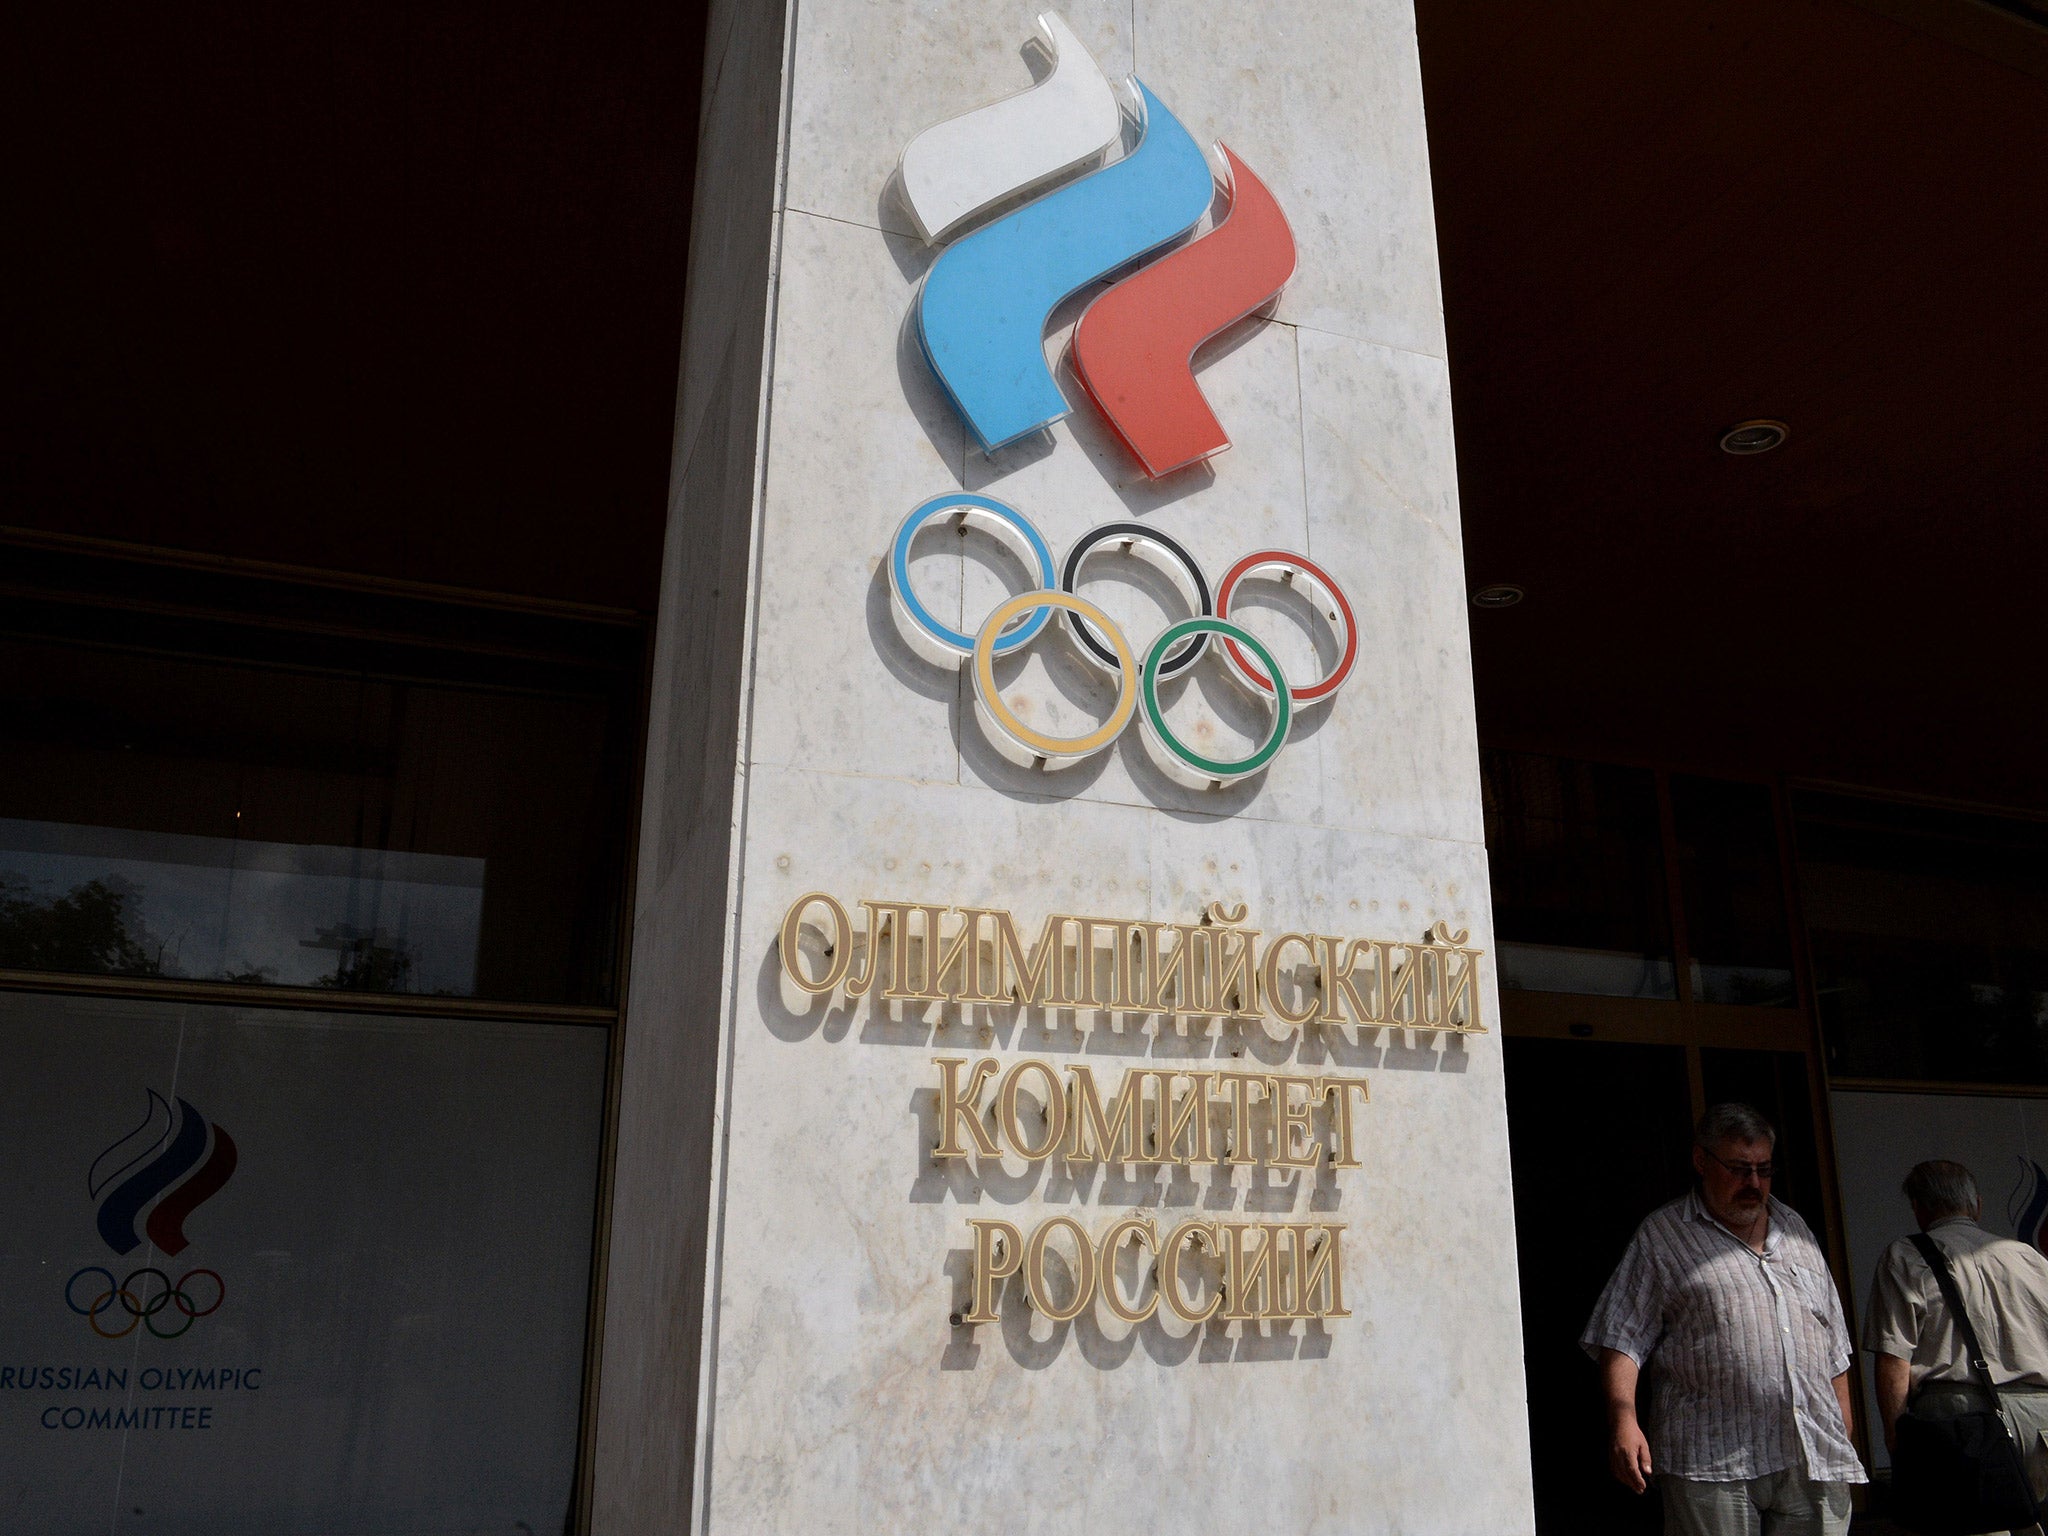 Russian athletes will be allowed to compete at the Rio 2016 Olympics